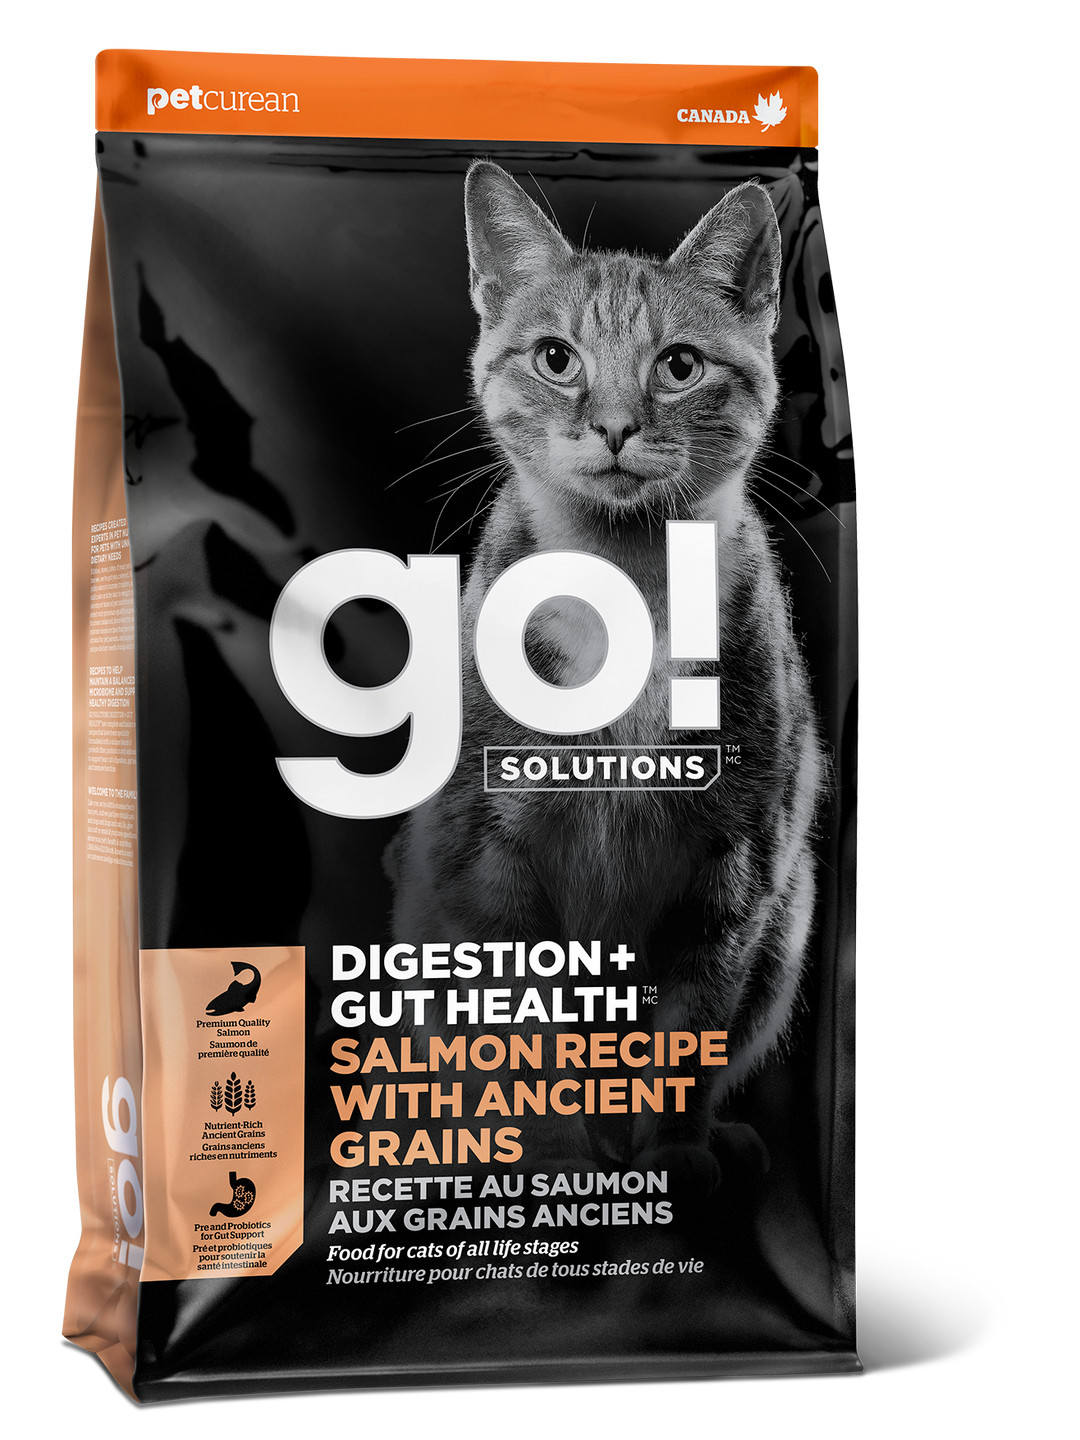 Go! Solutions Digestion + Gut Health Salmon Recipe With Ancient Grains Cat Food